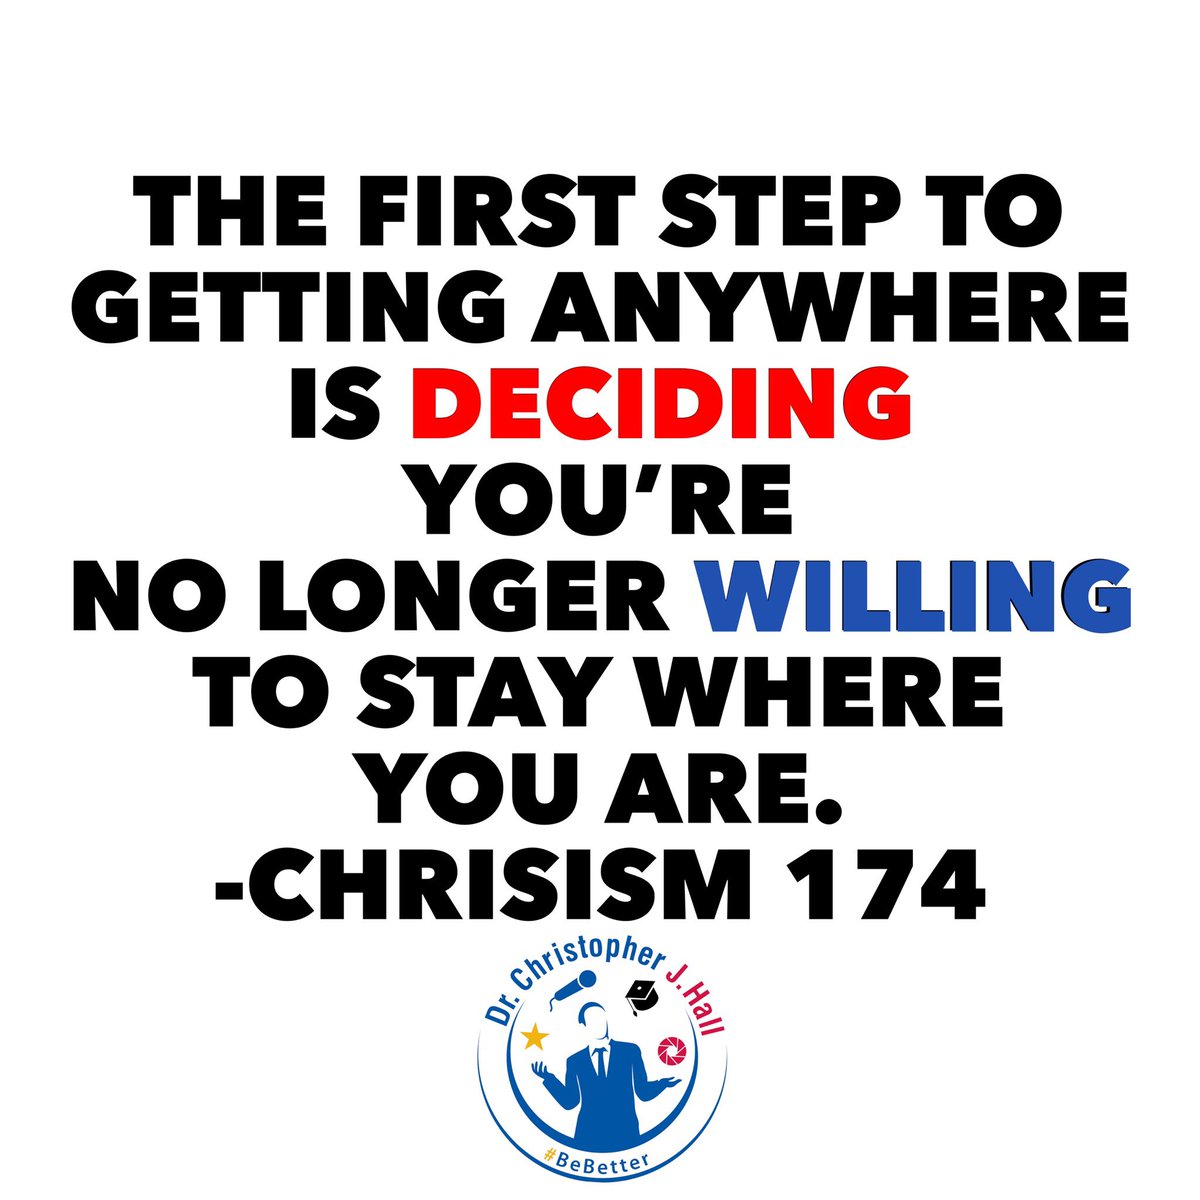 The first step to getting anywhere is deciding you’re no longer willing to stay where you are. Chrisism 174
.
#firststep #step #motivation #anywhere #deciding #inspiration #Chrisism #Chrisisms #willing #stay #lifelesson #noexcuses #BeBetter